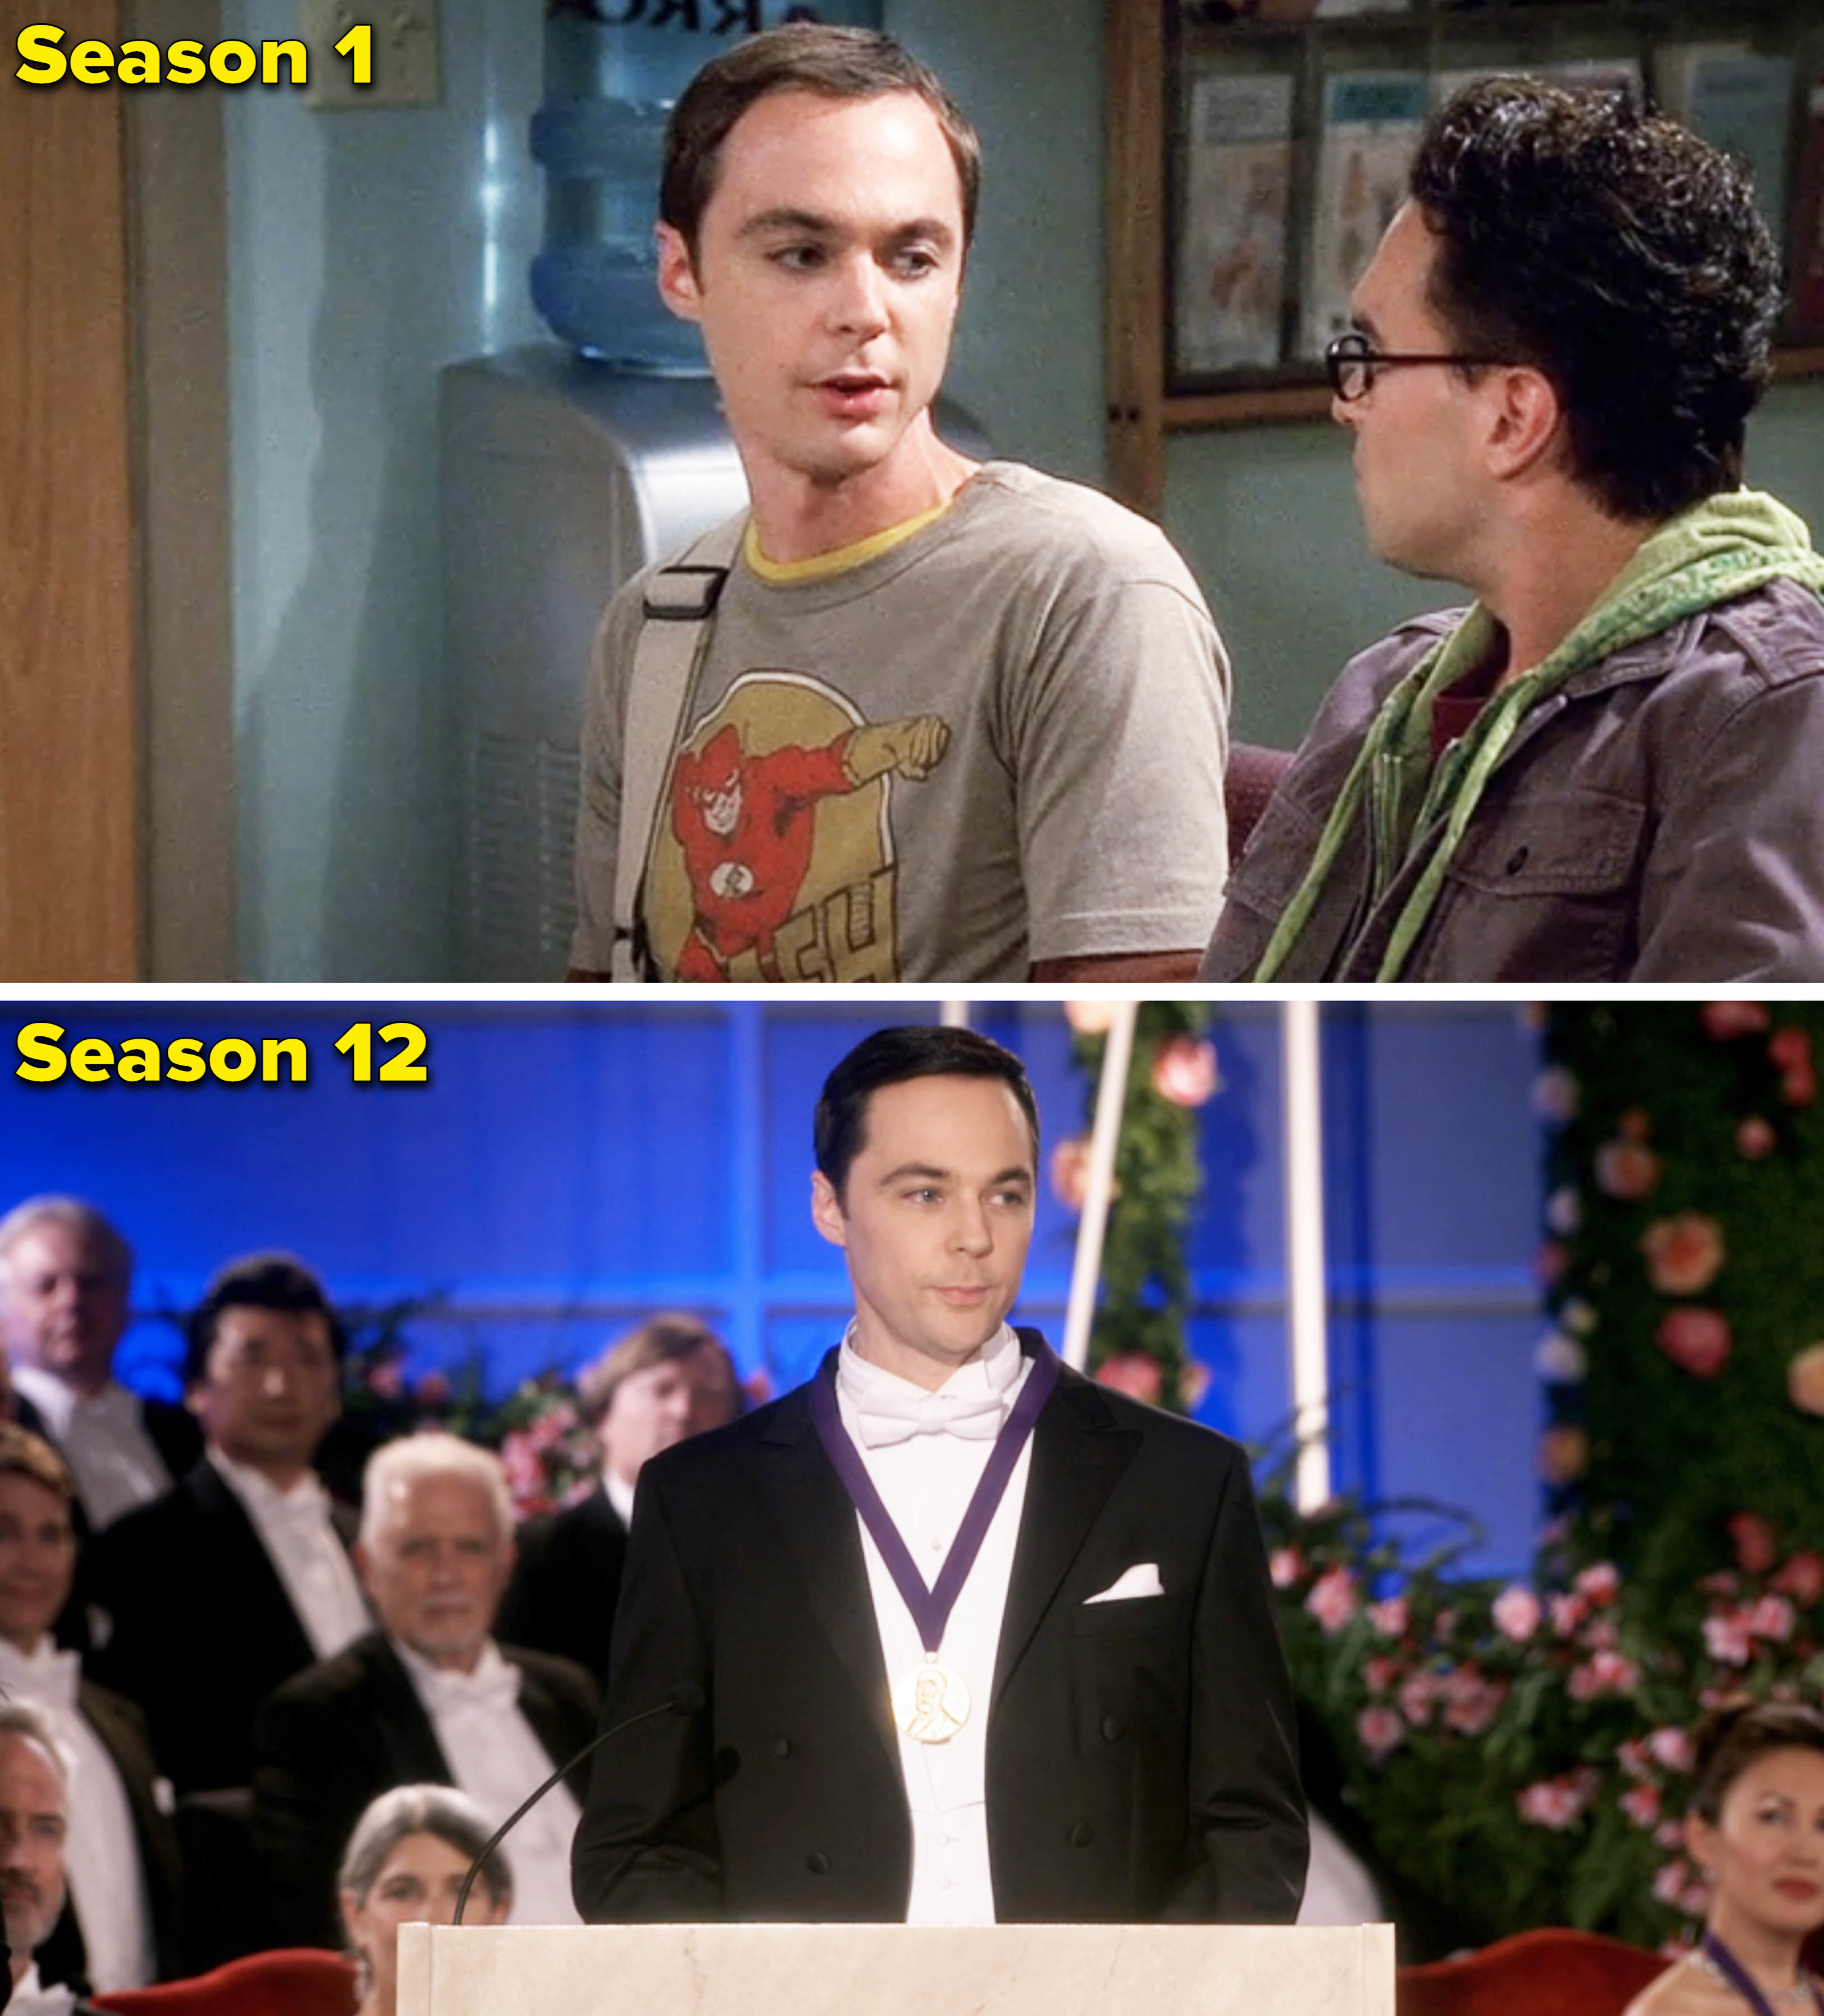 Jim shown in seasons 1 and 12